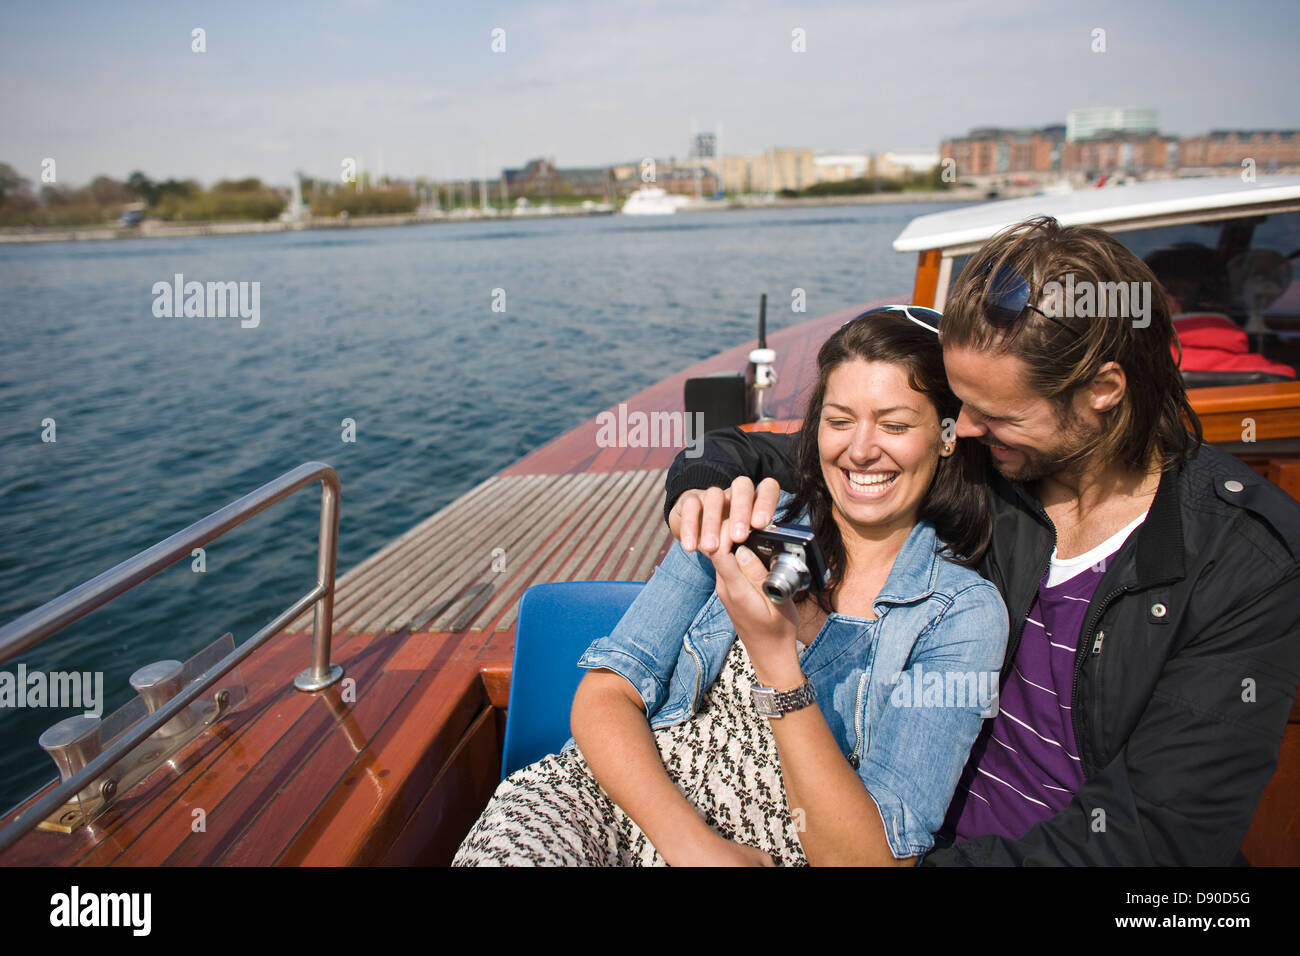 Couple in boat looking at images in camera, smiling Stock Photo